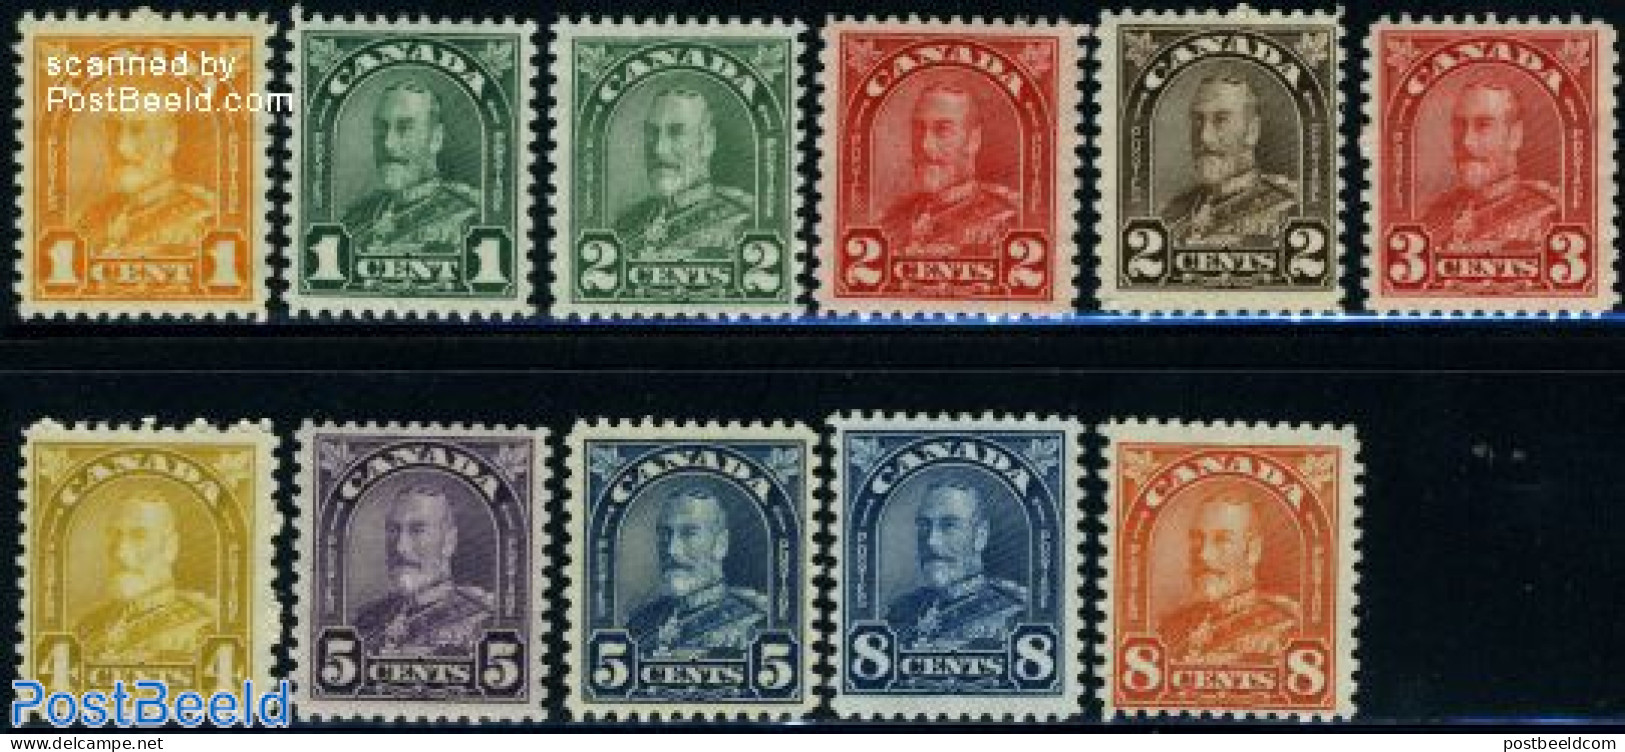 Canada 1930 Definitives 11v, Mint NH - Unused Stamps